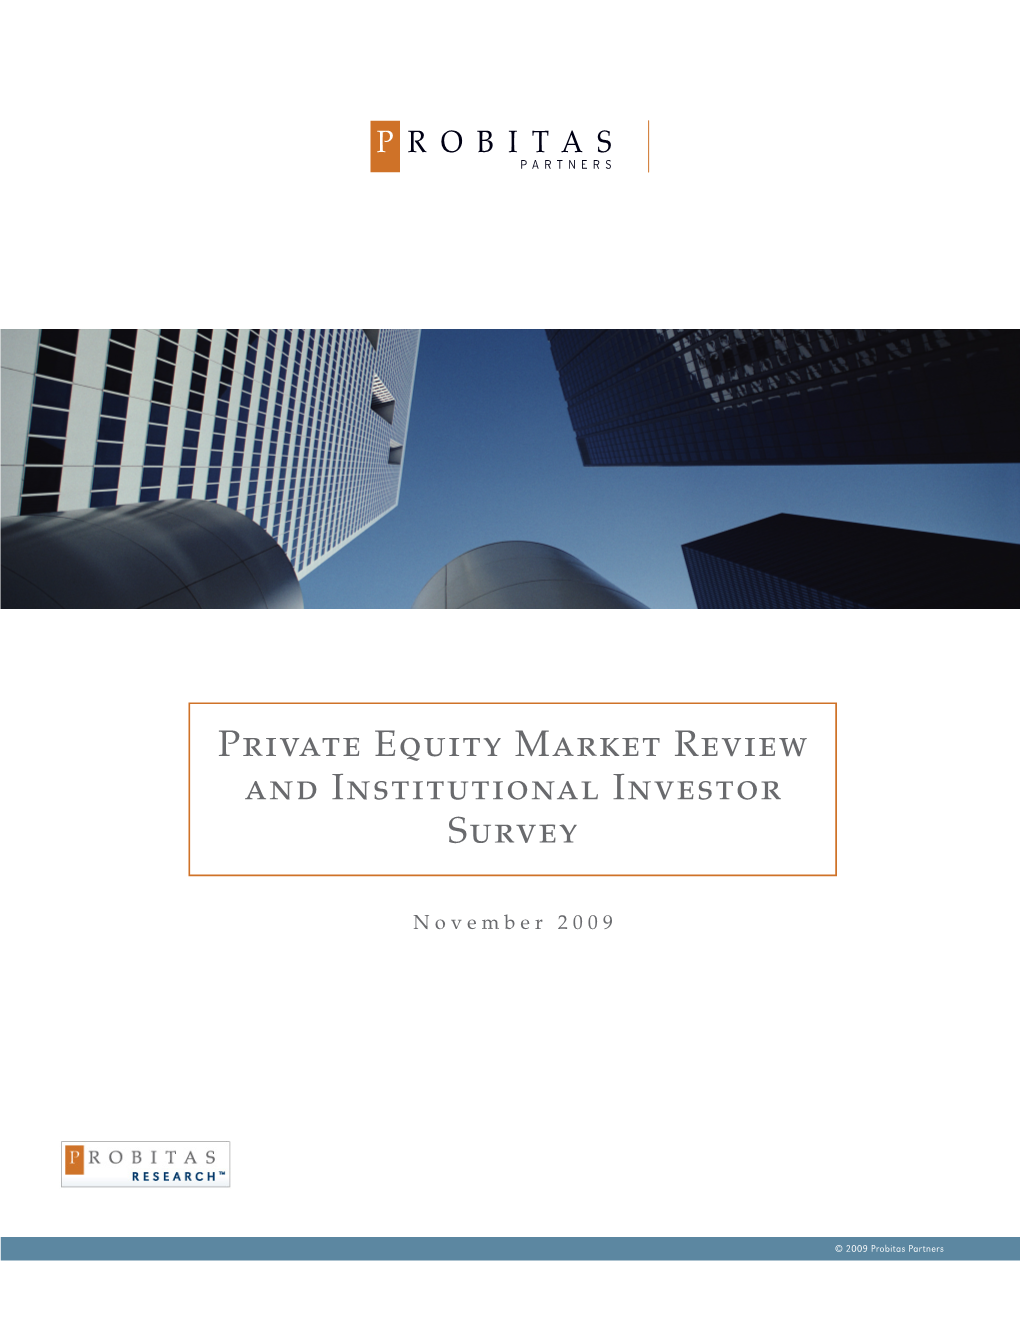 Private Equity Market Review and Institutional Investor Survey